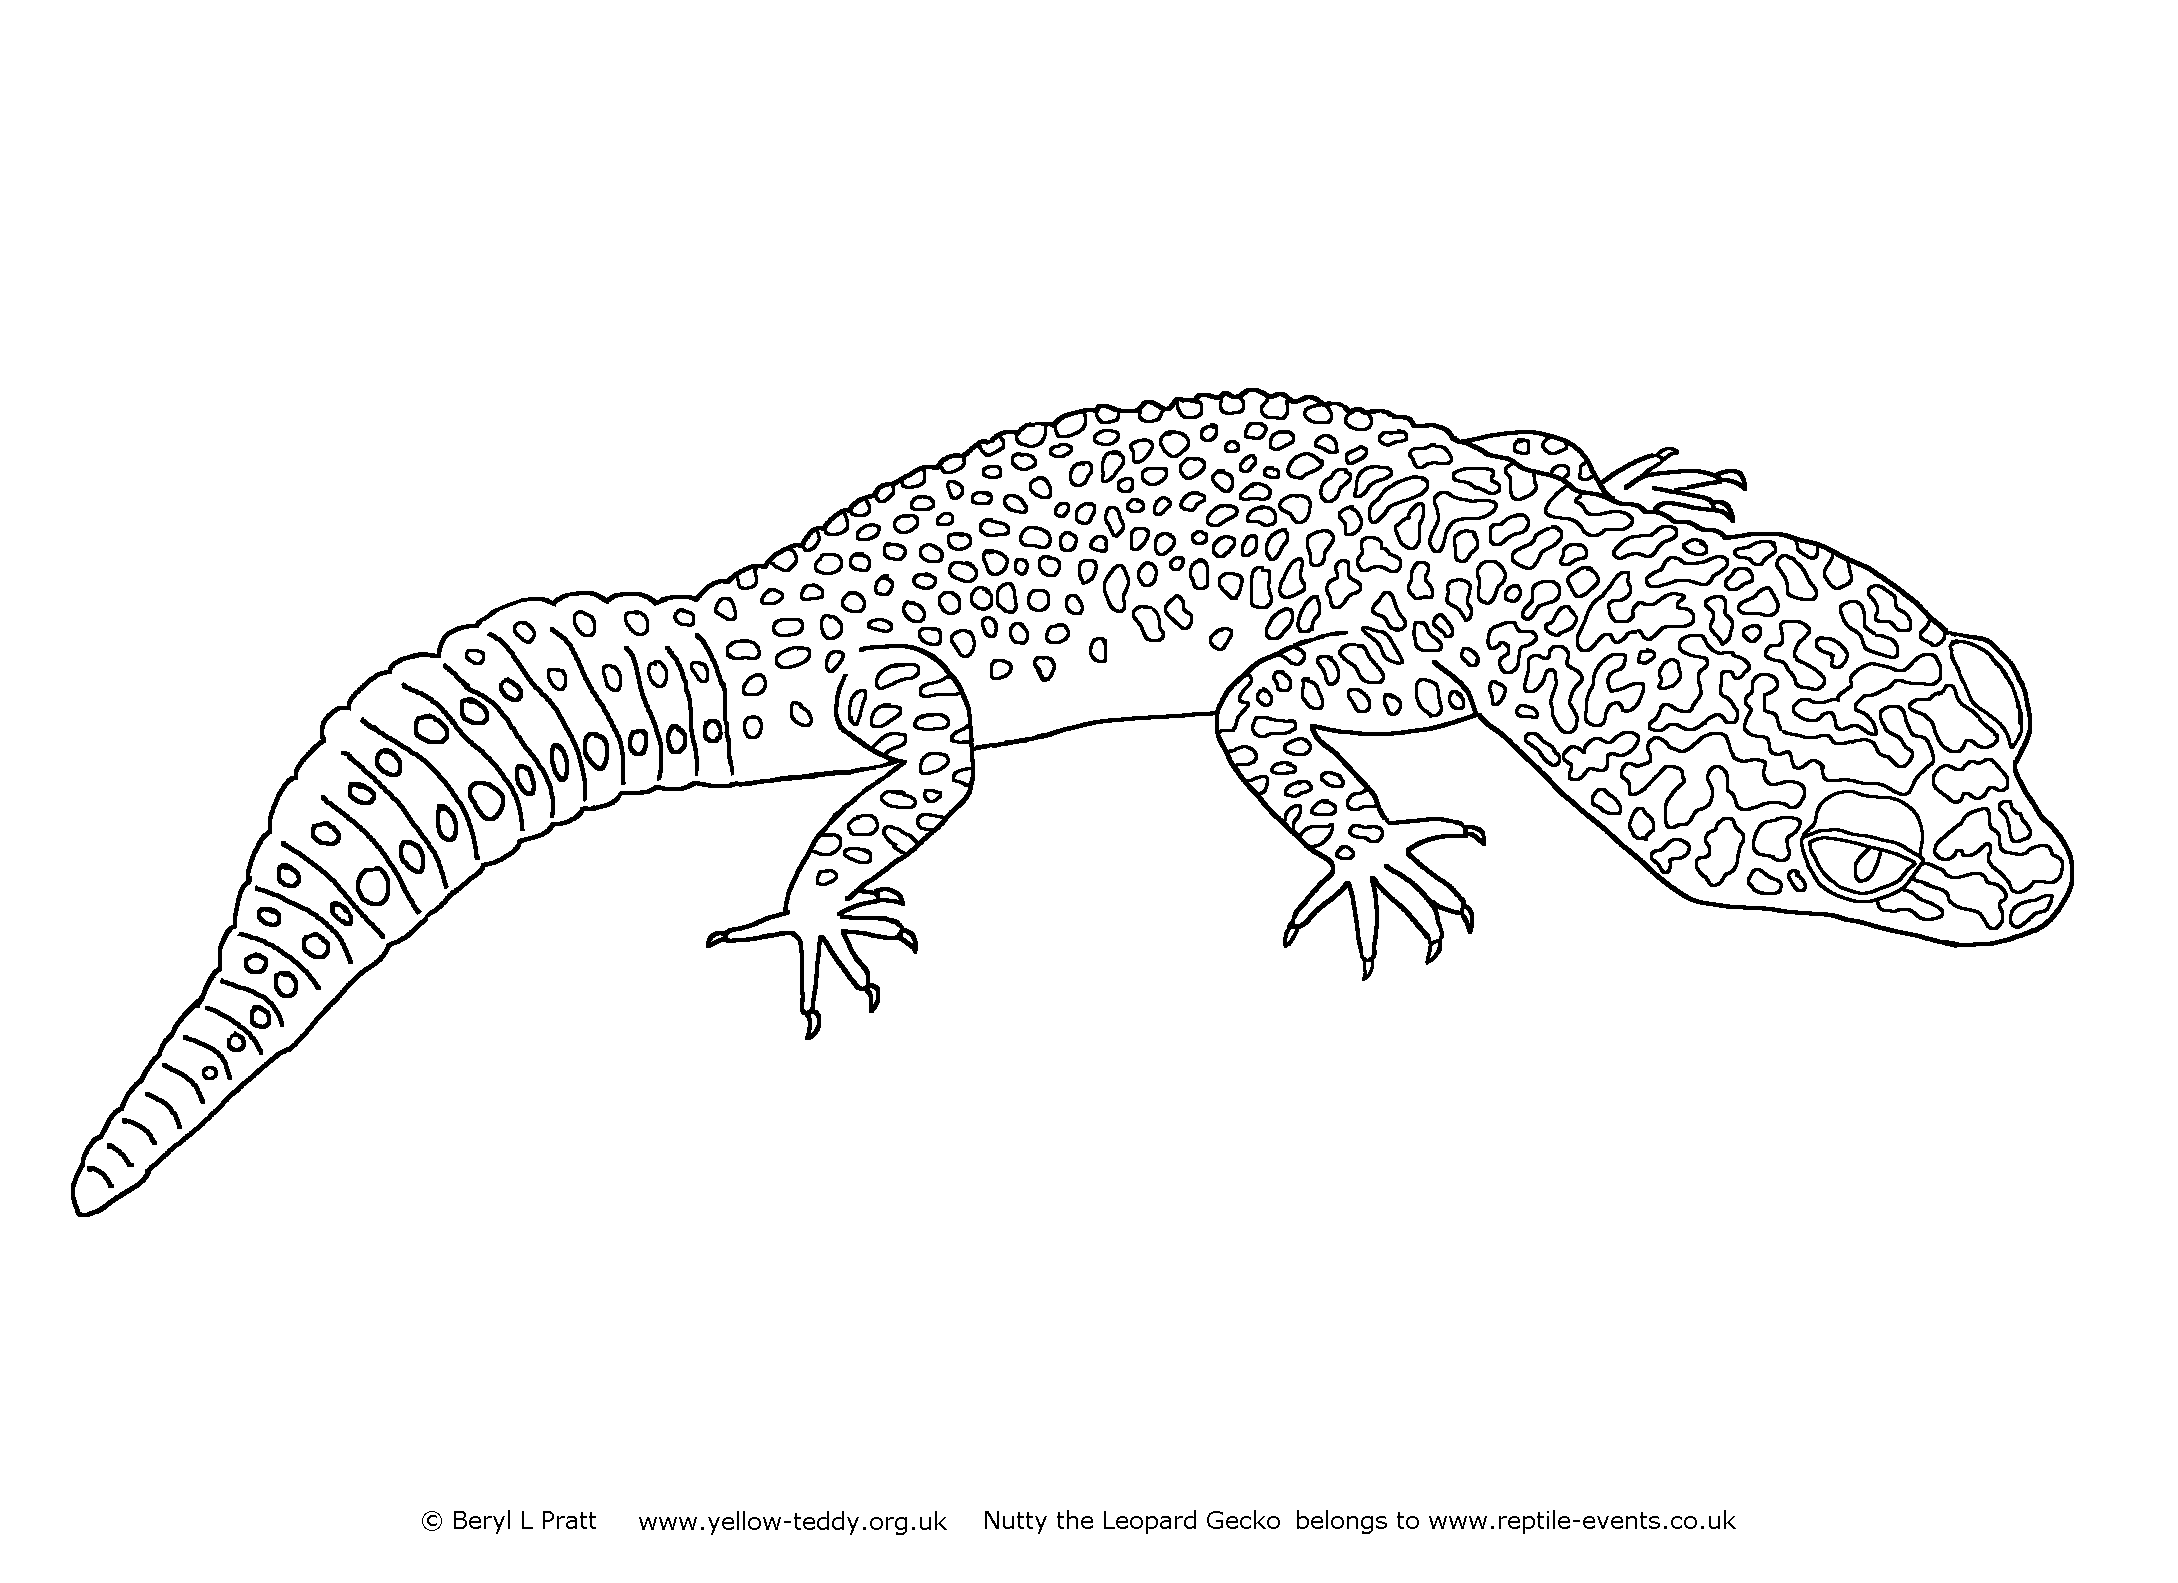 Line drawing of Nutty the Leopard Gecko